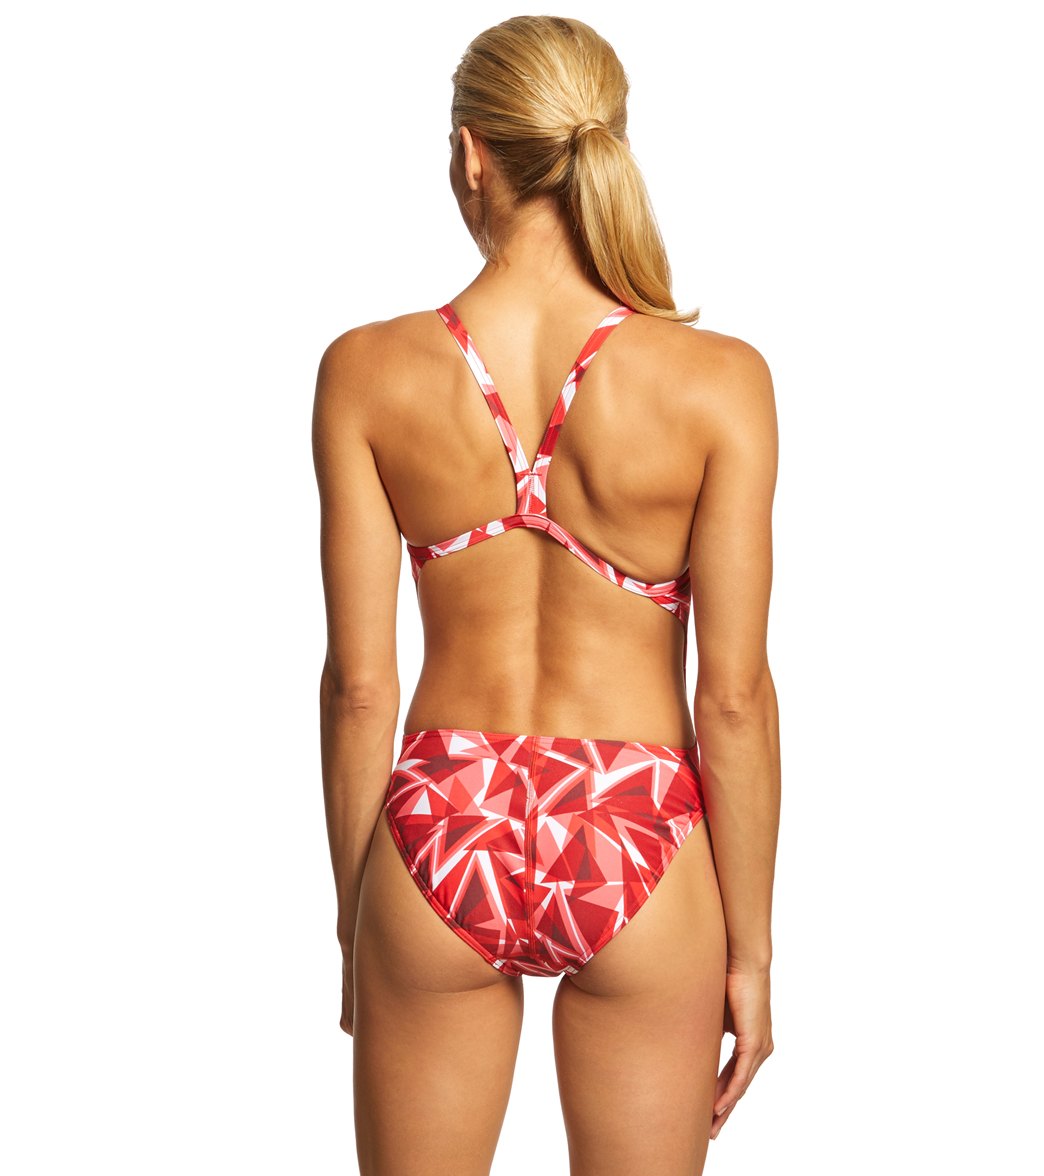 Arena Women's Shattered Glass Challenge Maxlife Thin Strap Open Back One Piece Swimsuit (32, Fluo Red) - image 3 of 6